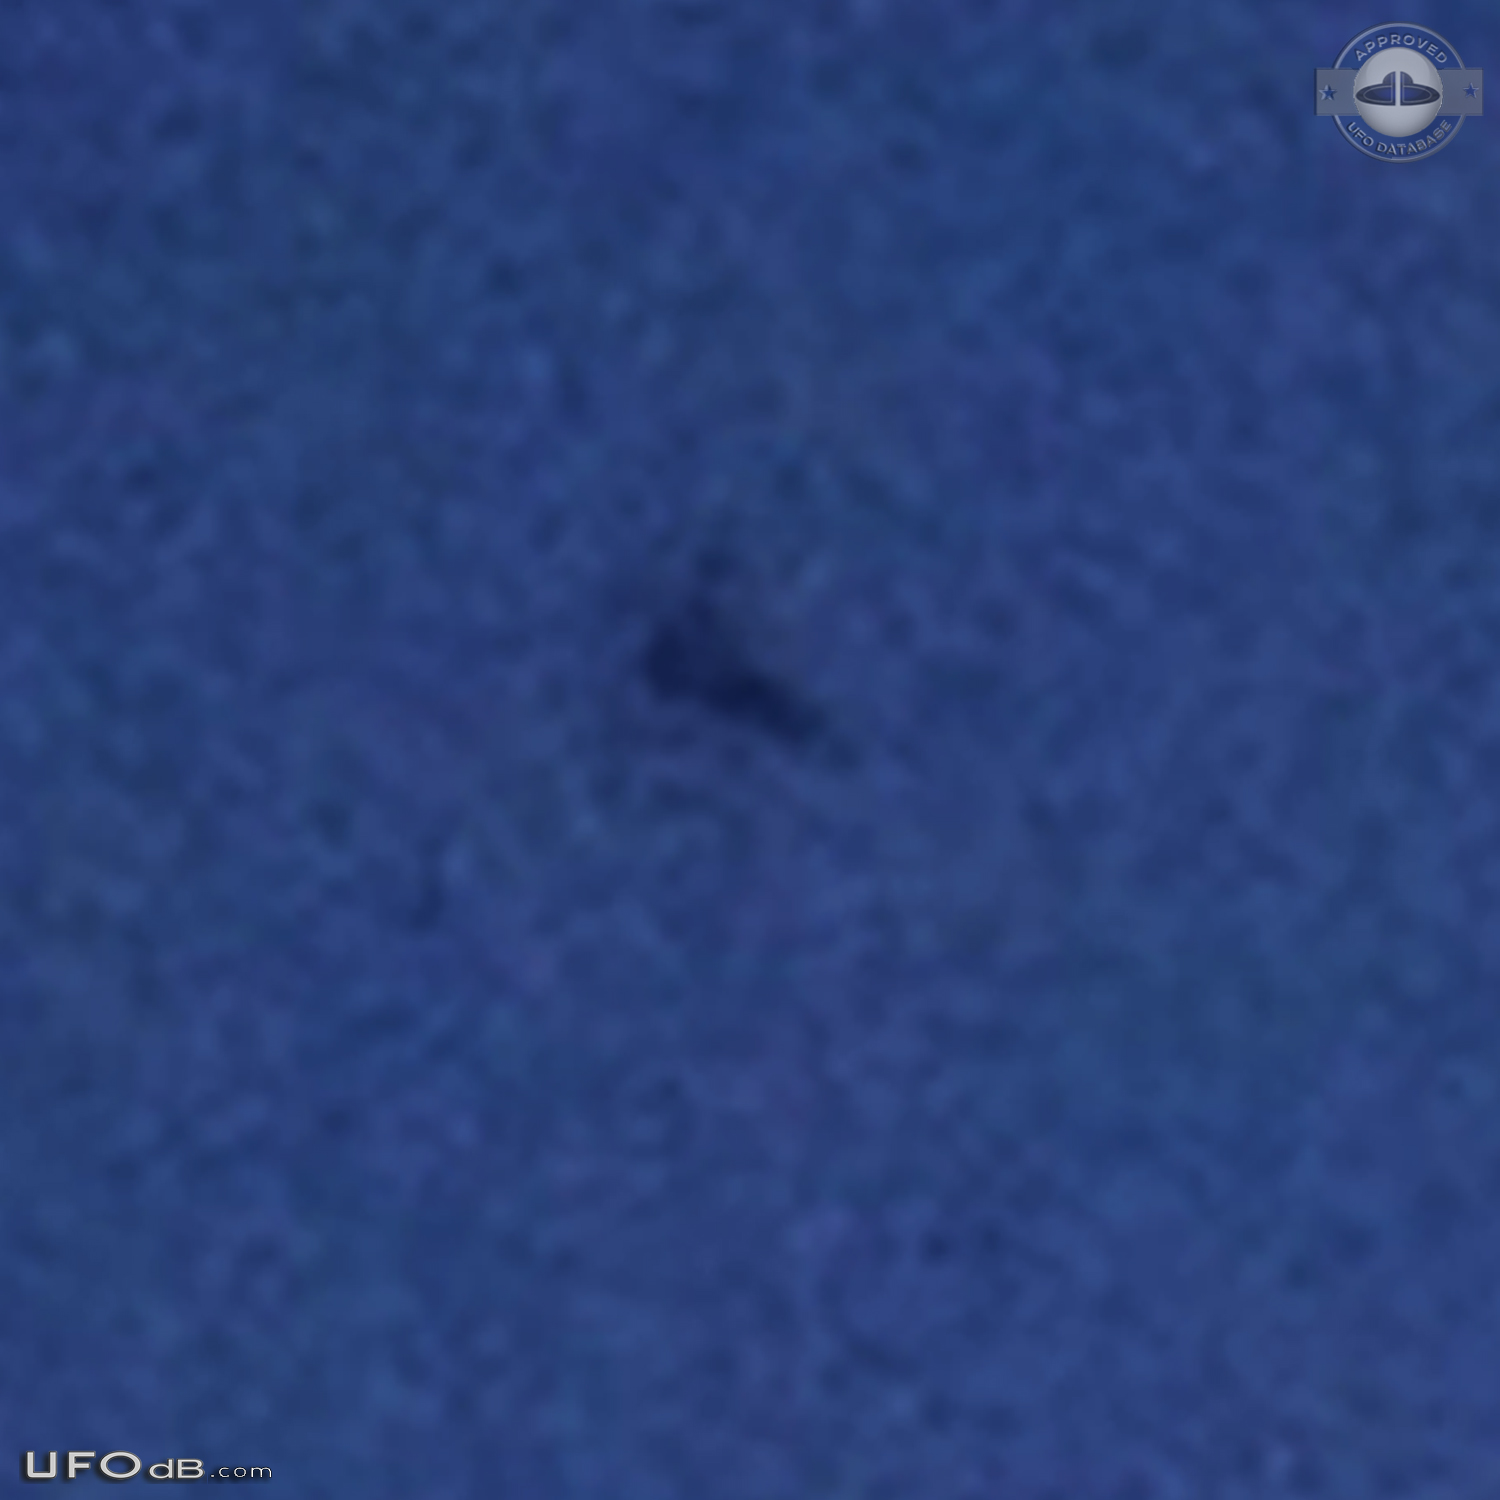 Triangle object moved at high speed, then stationary - Trinity Florida UFO Picture #677-5